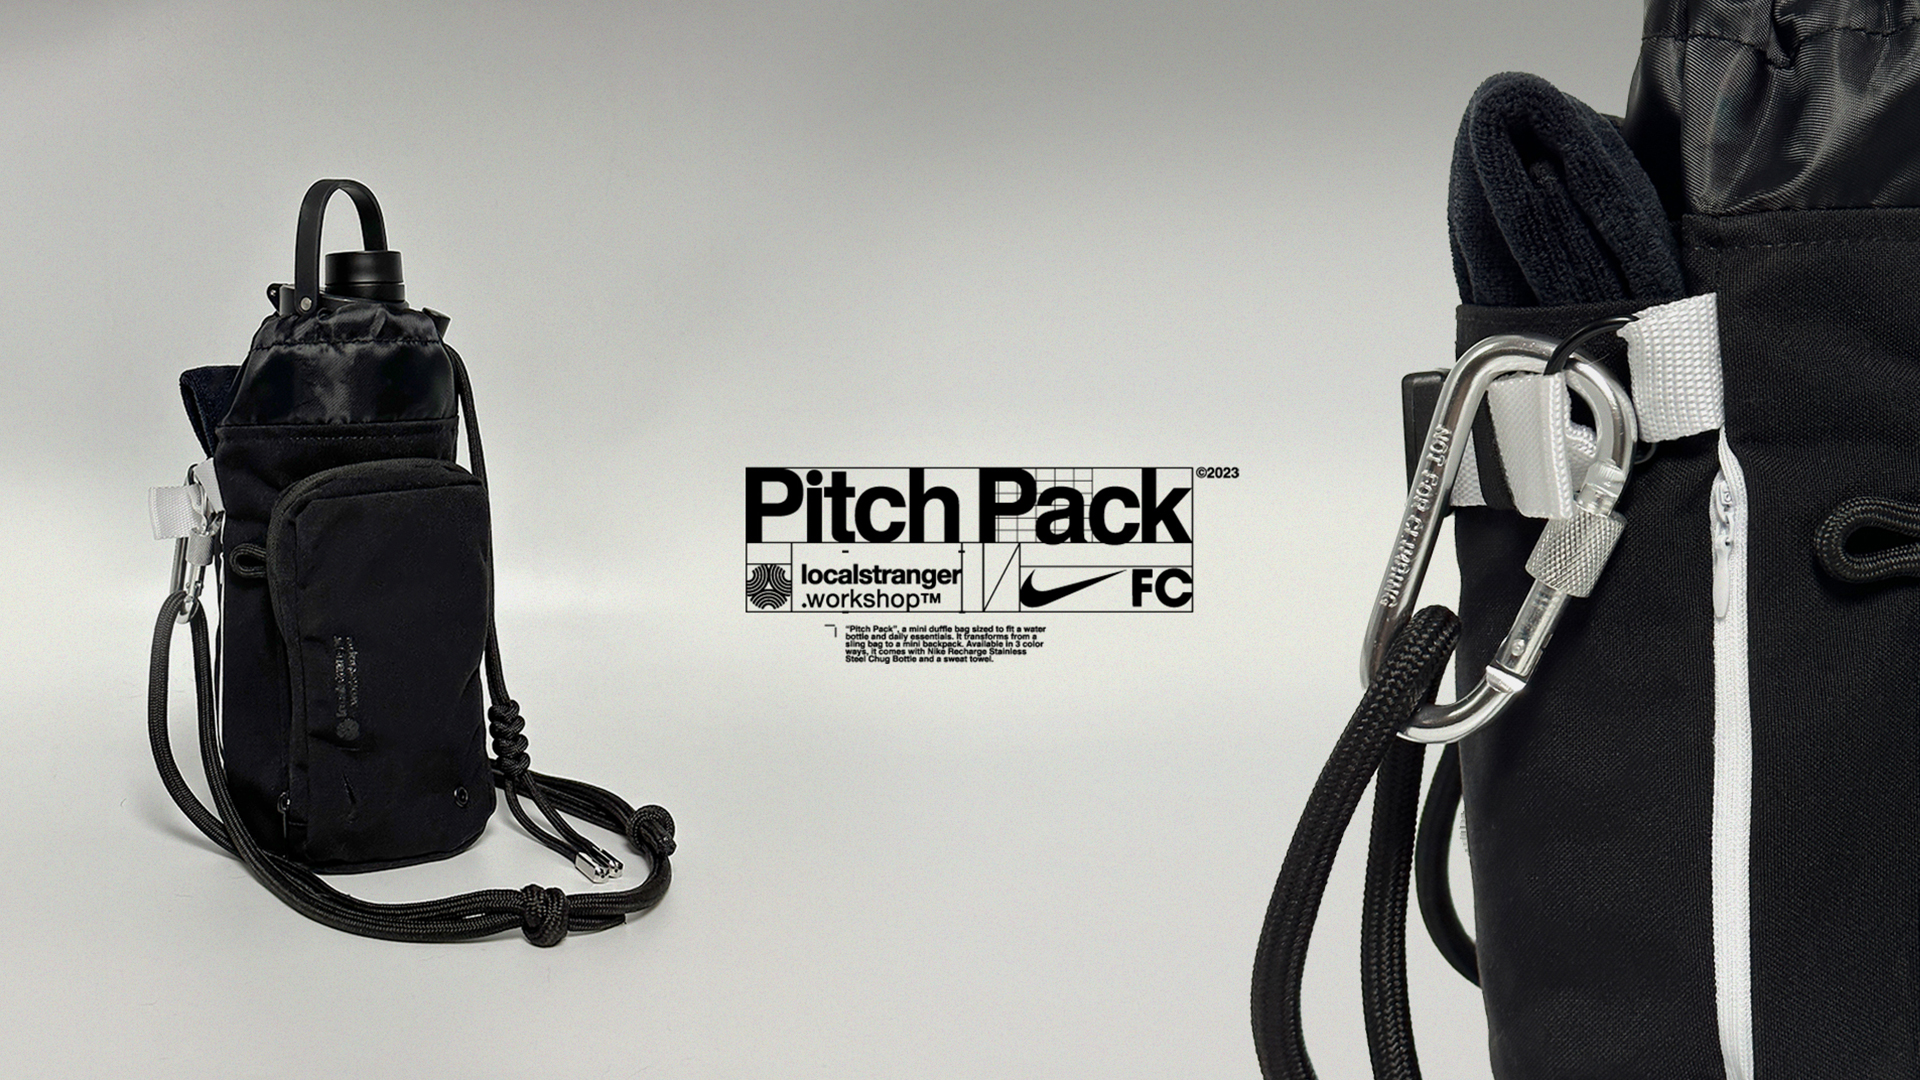 PITCH PACK